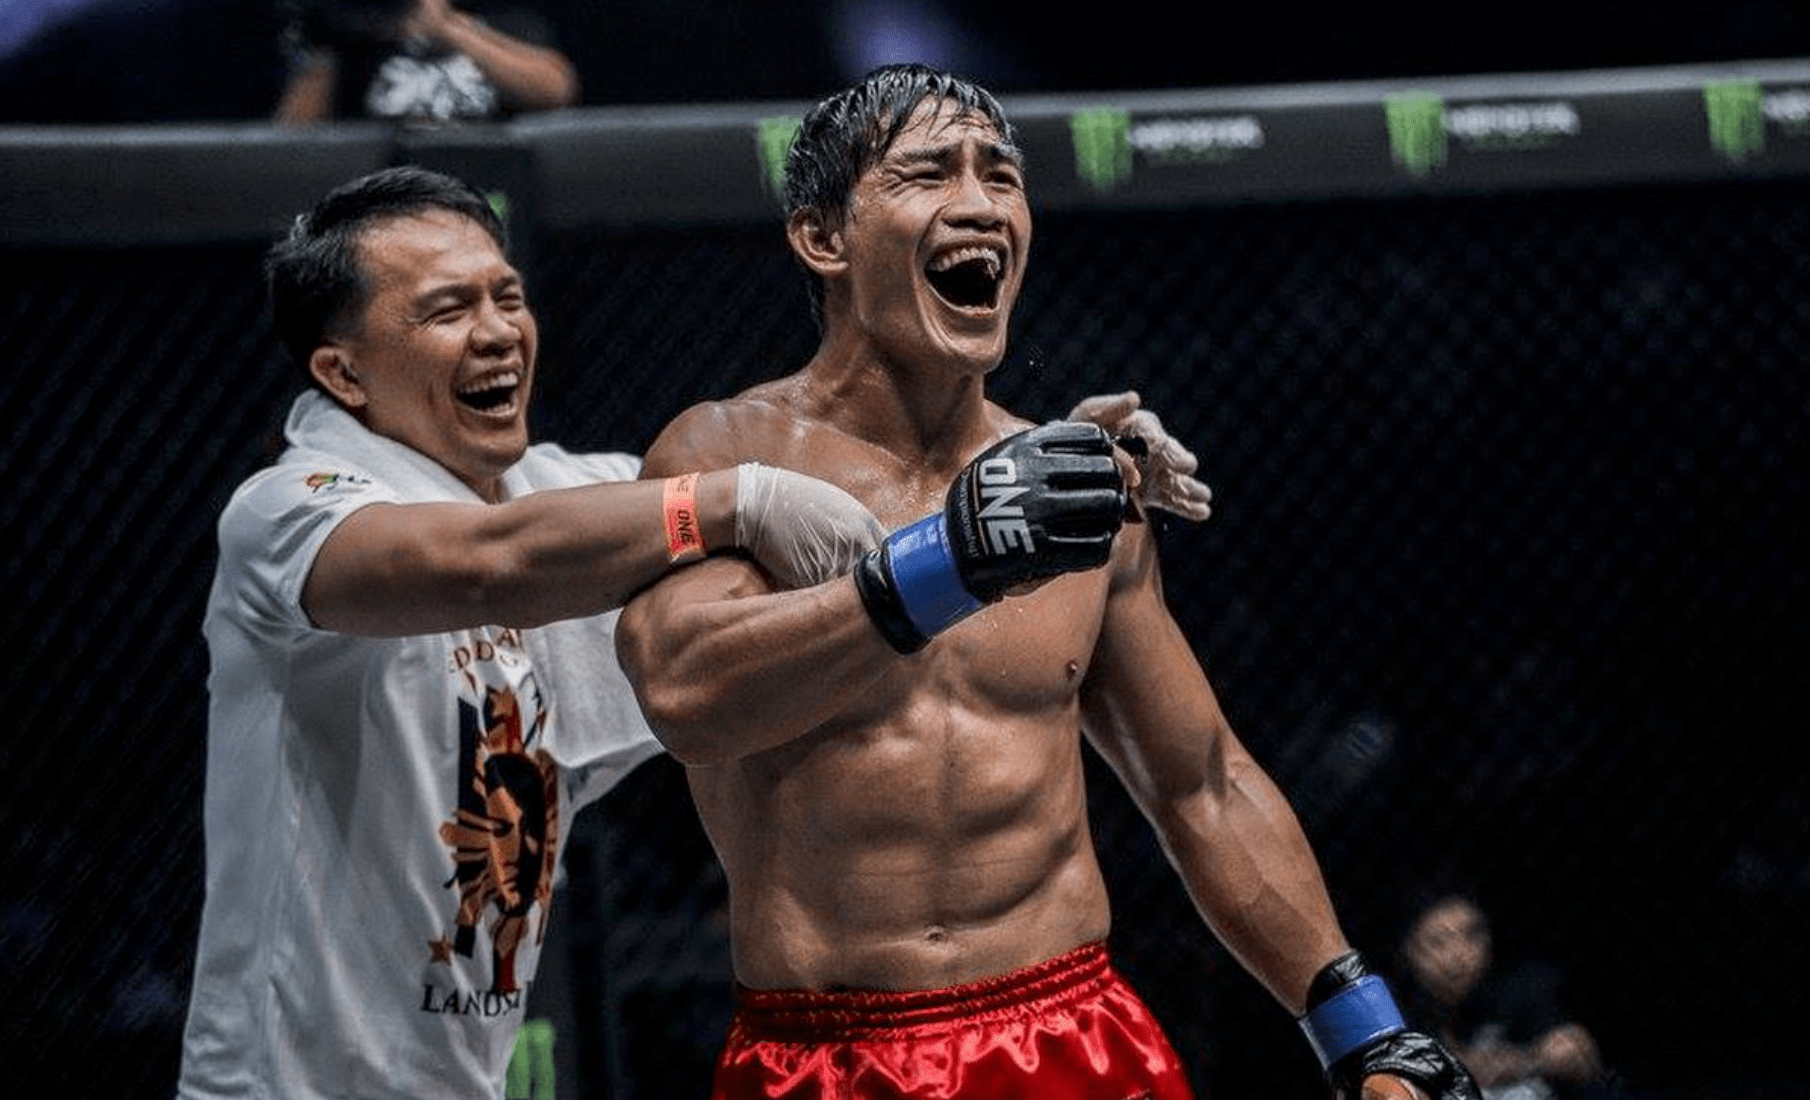 Eduard Folayang Is Predicting A Submission Win Over Shinya Aoki